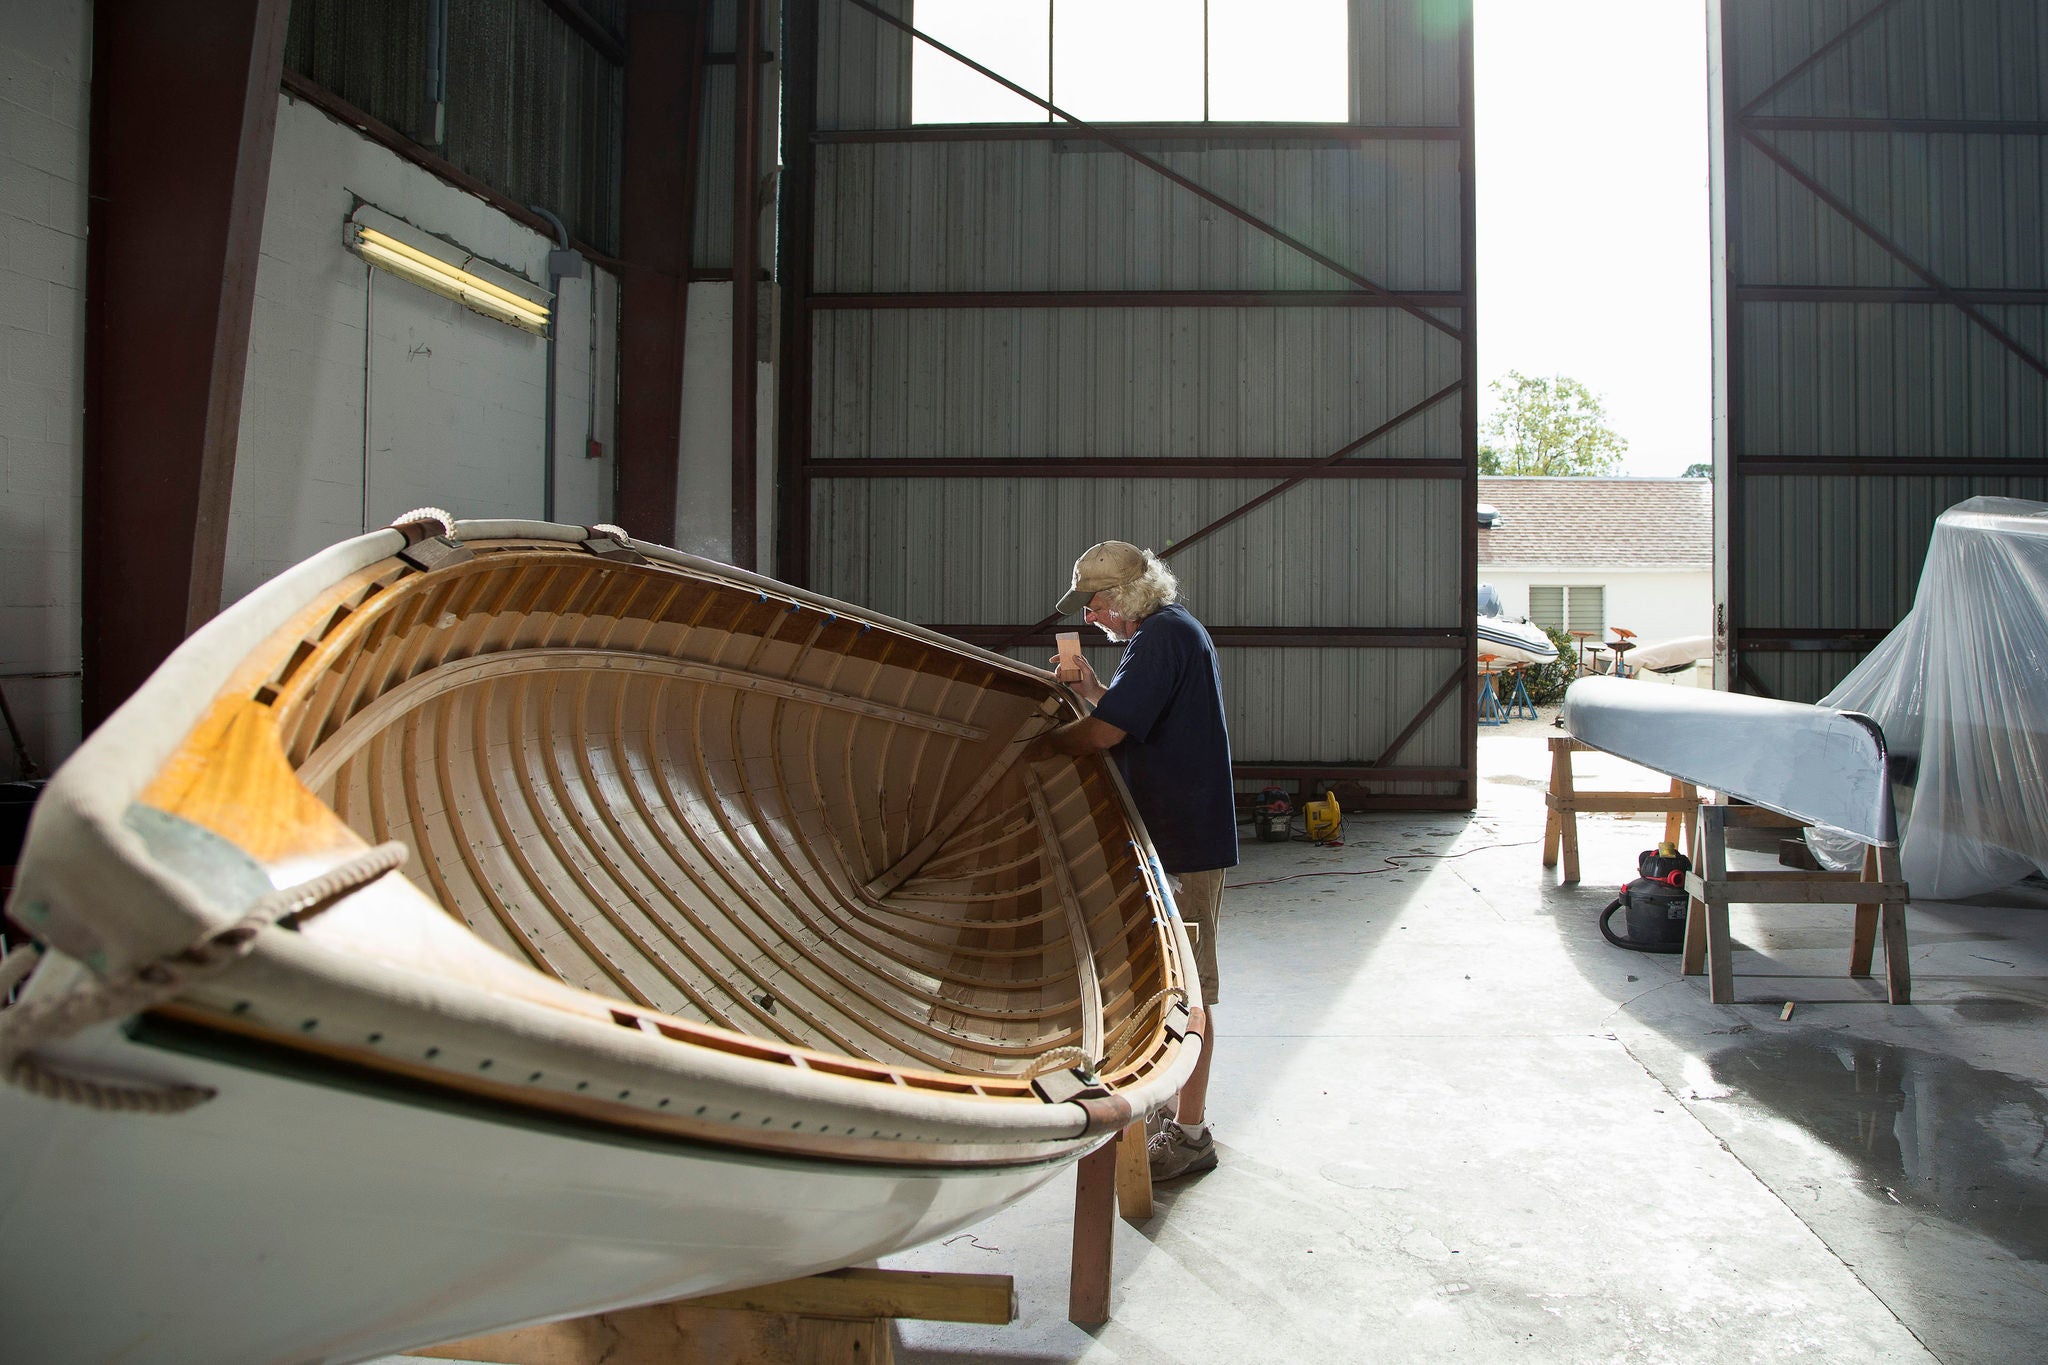 Craftsperson working indoors at boatyard to maintain boats